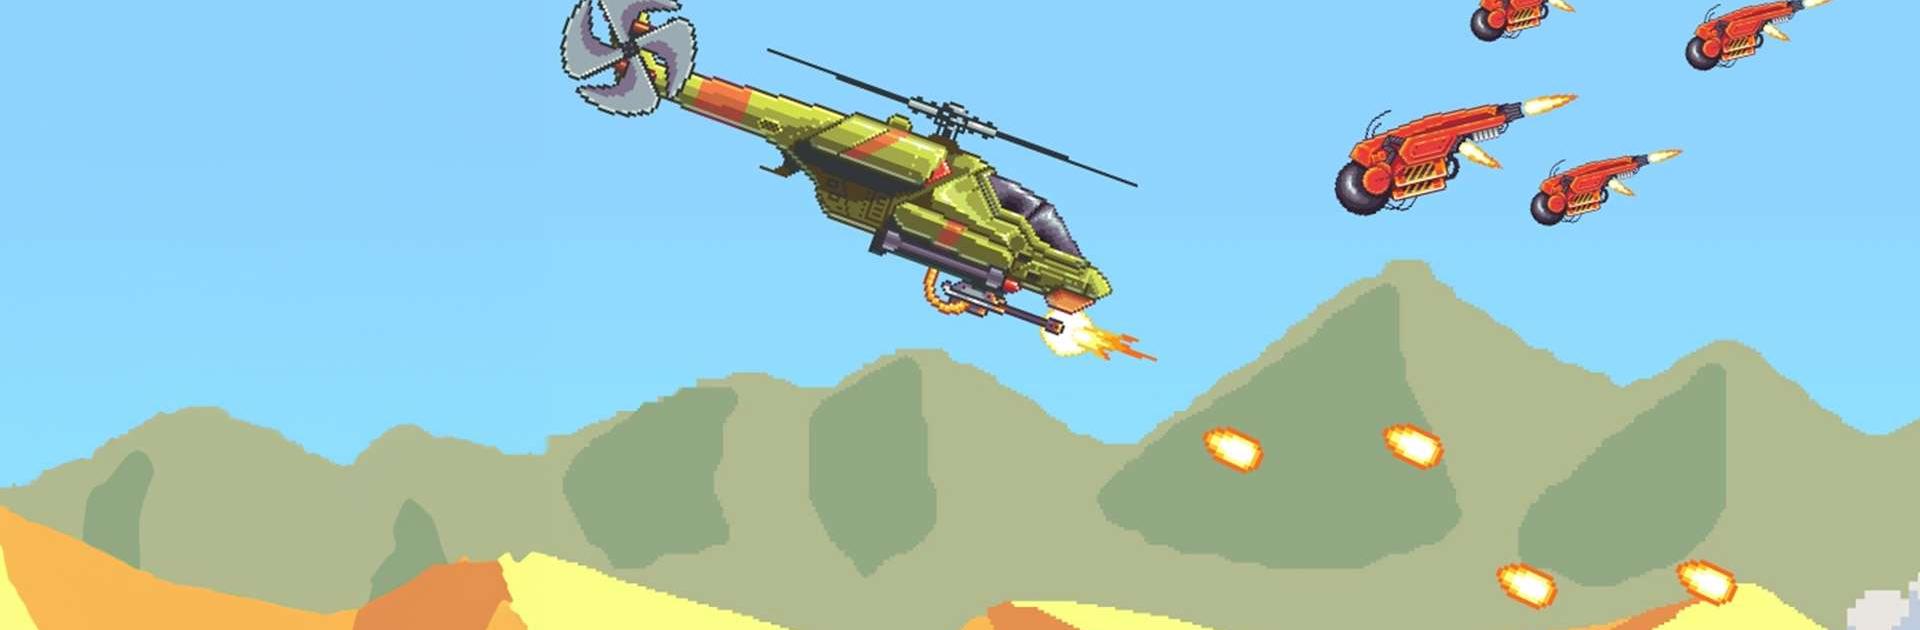 Play Helicopter Cyber Strike Online